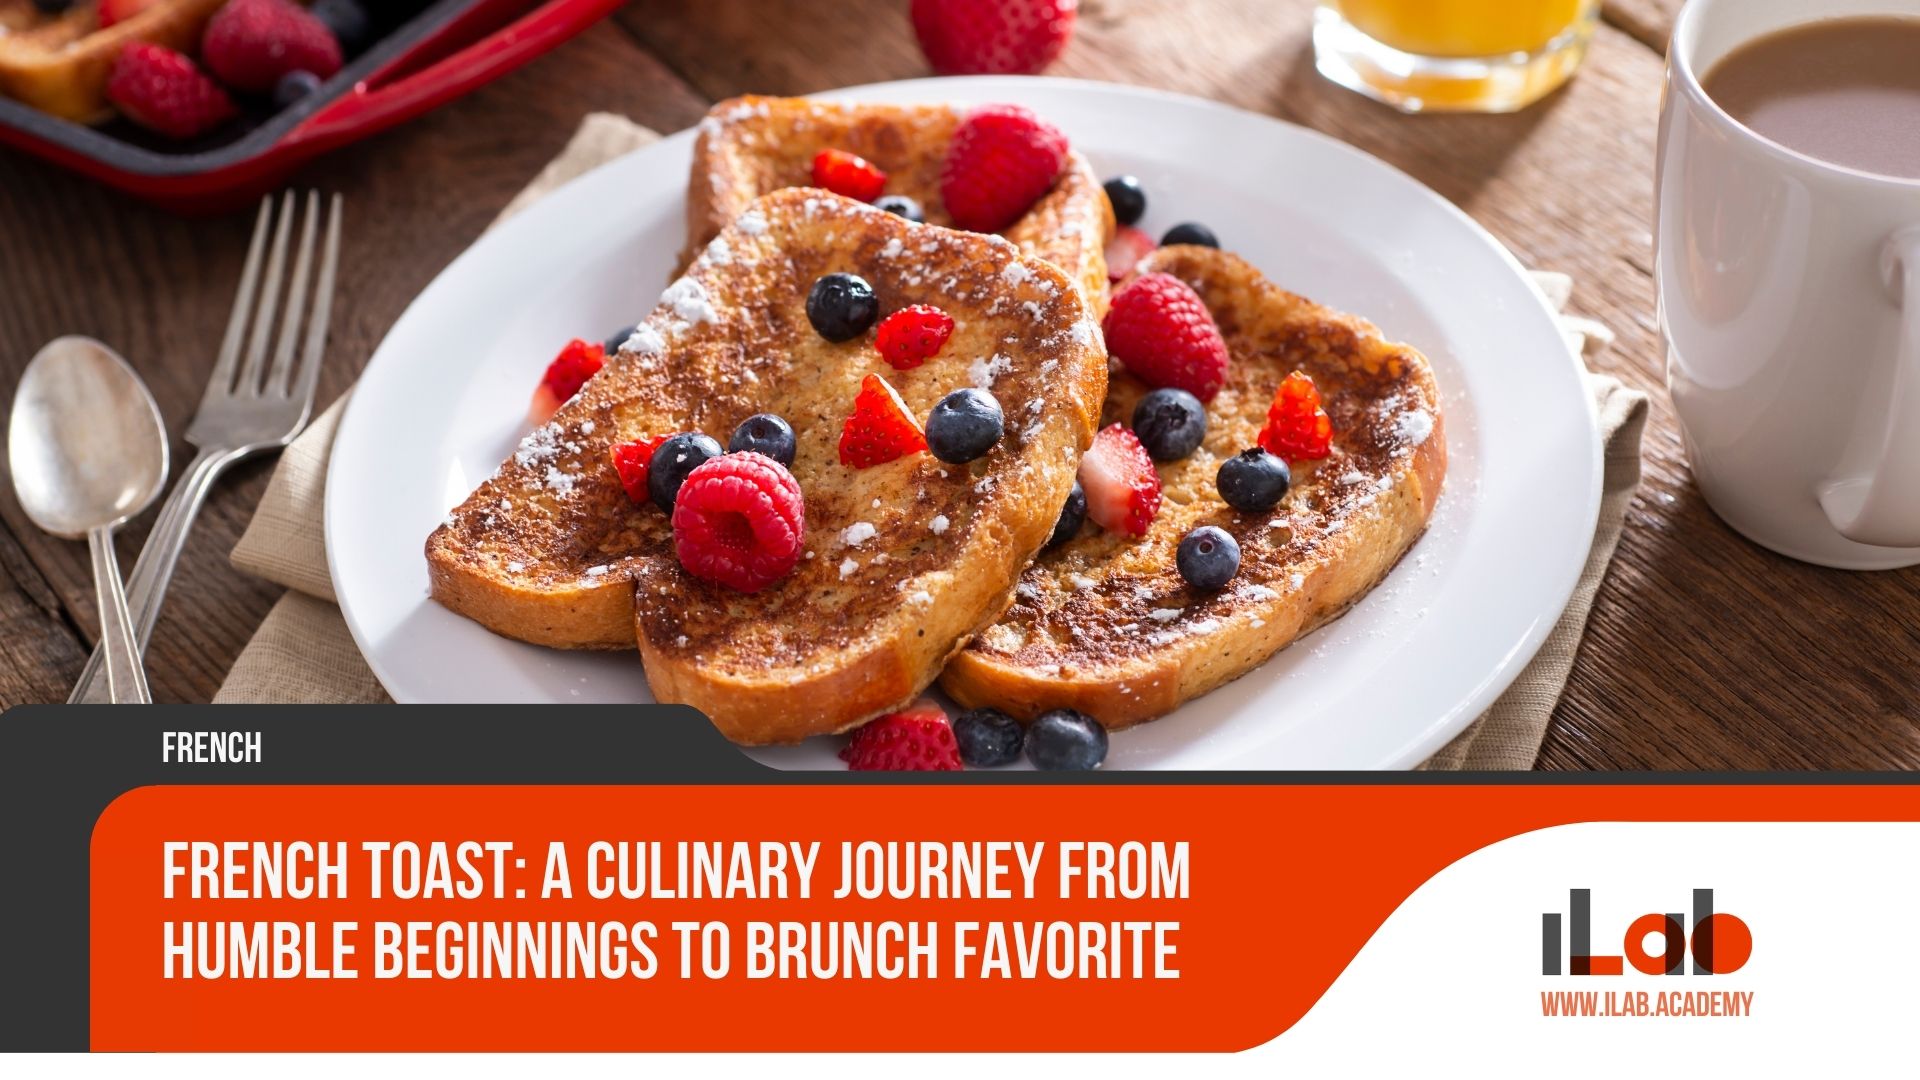 French Toast: a Culinary Journey From Humble Beginnings to Brunch Favorite